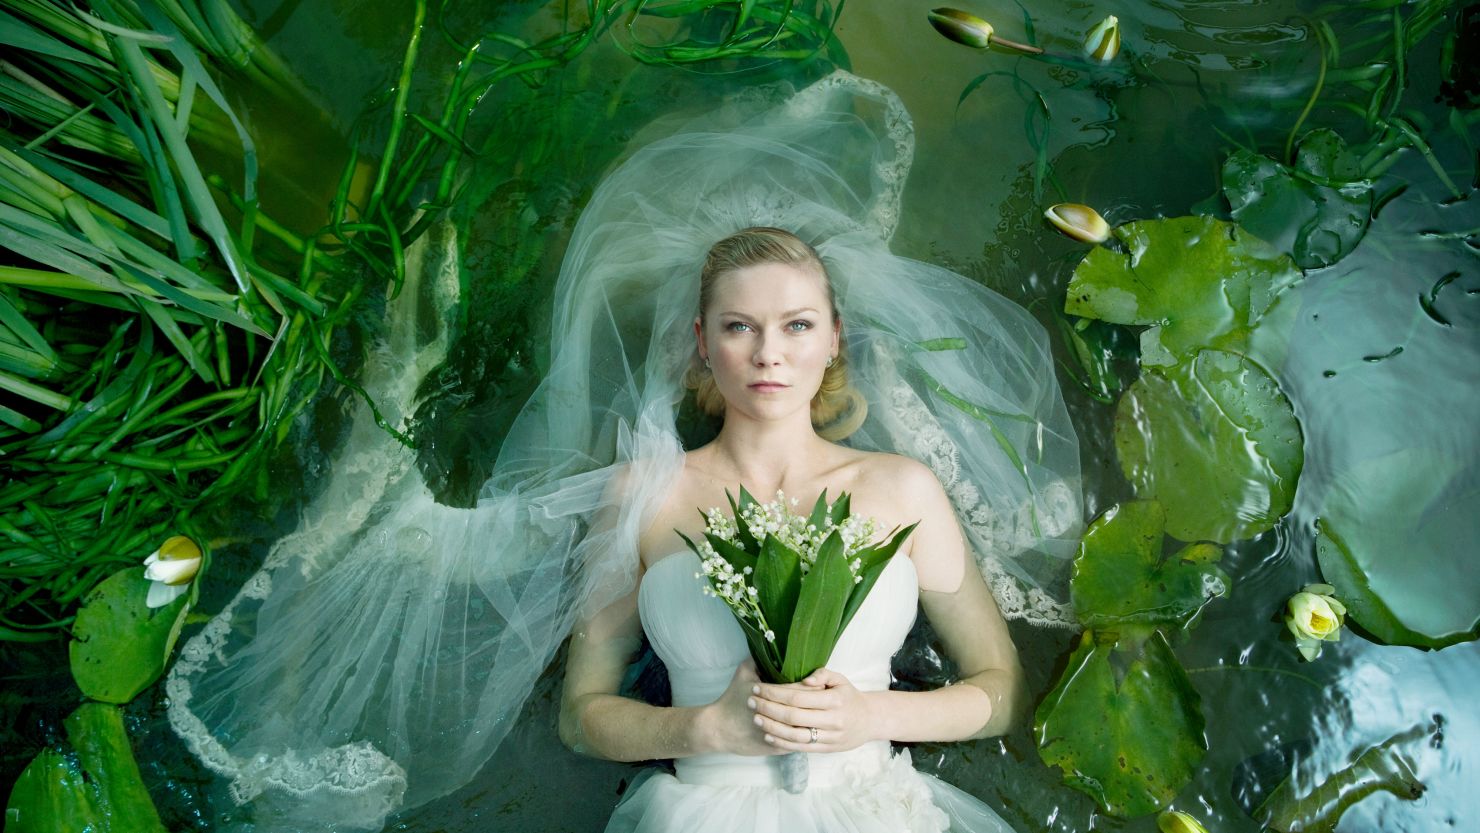 Kirsten Dunst plays a troubled bride in the film "Meloncholia."